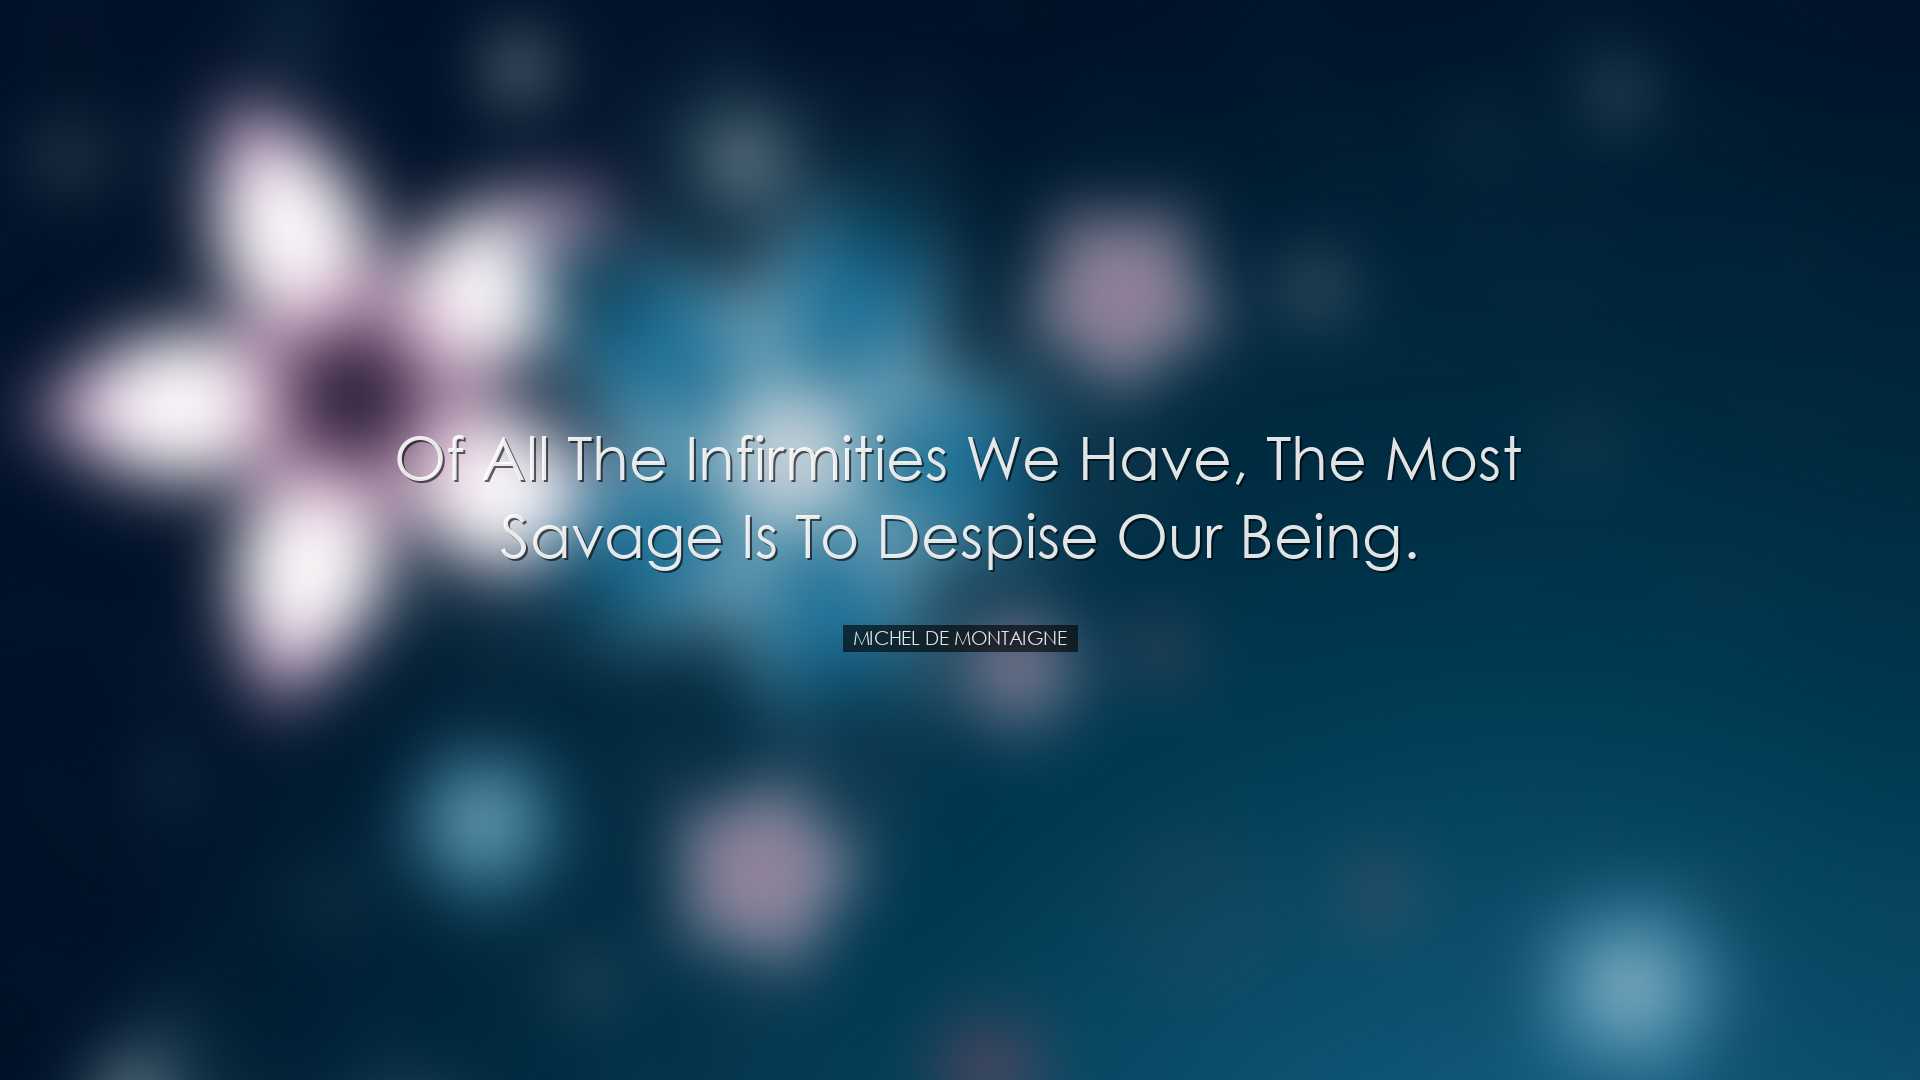 Of all the infirmities we have, the most savage is to despise our